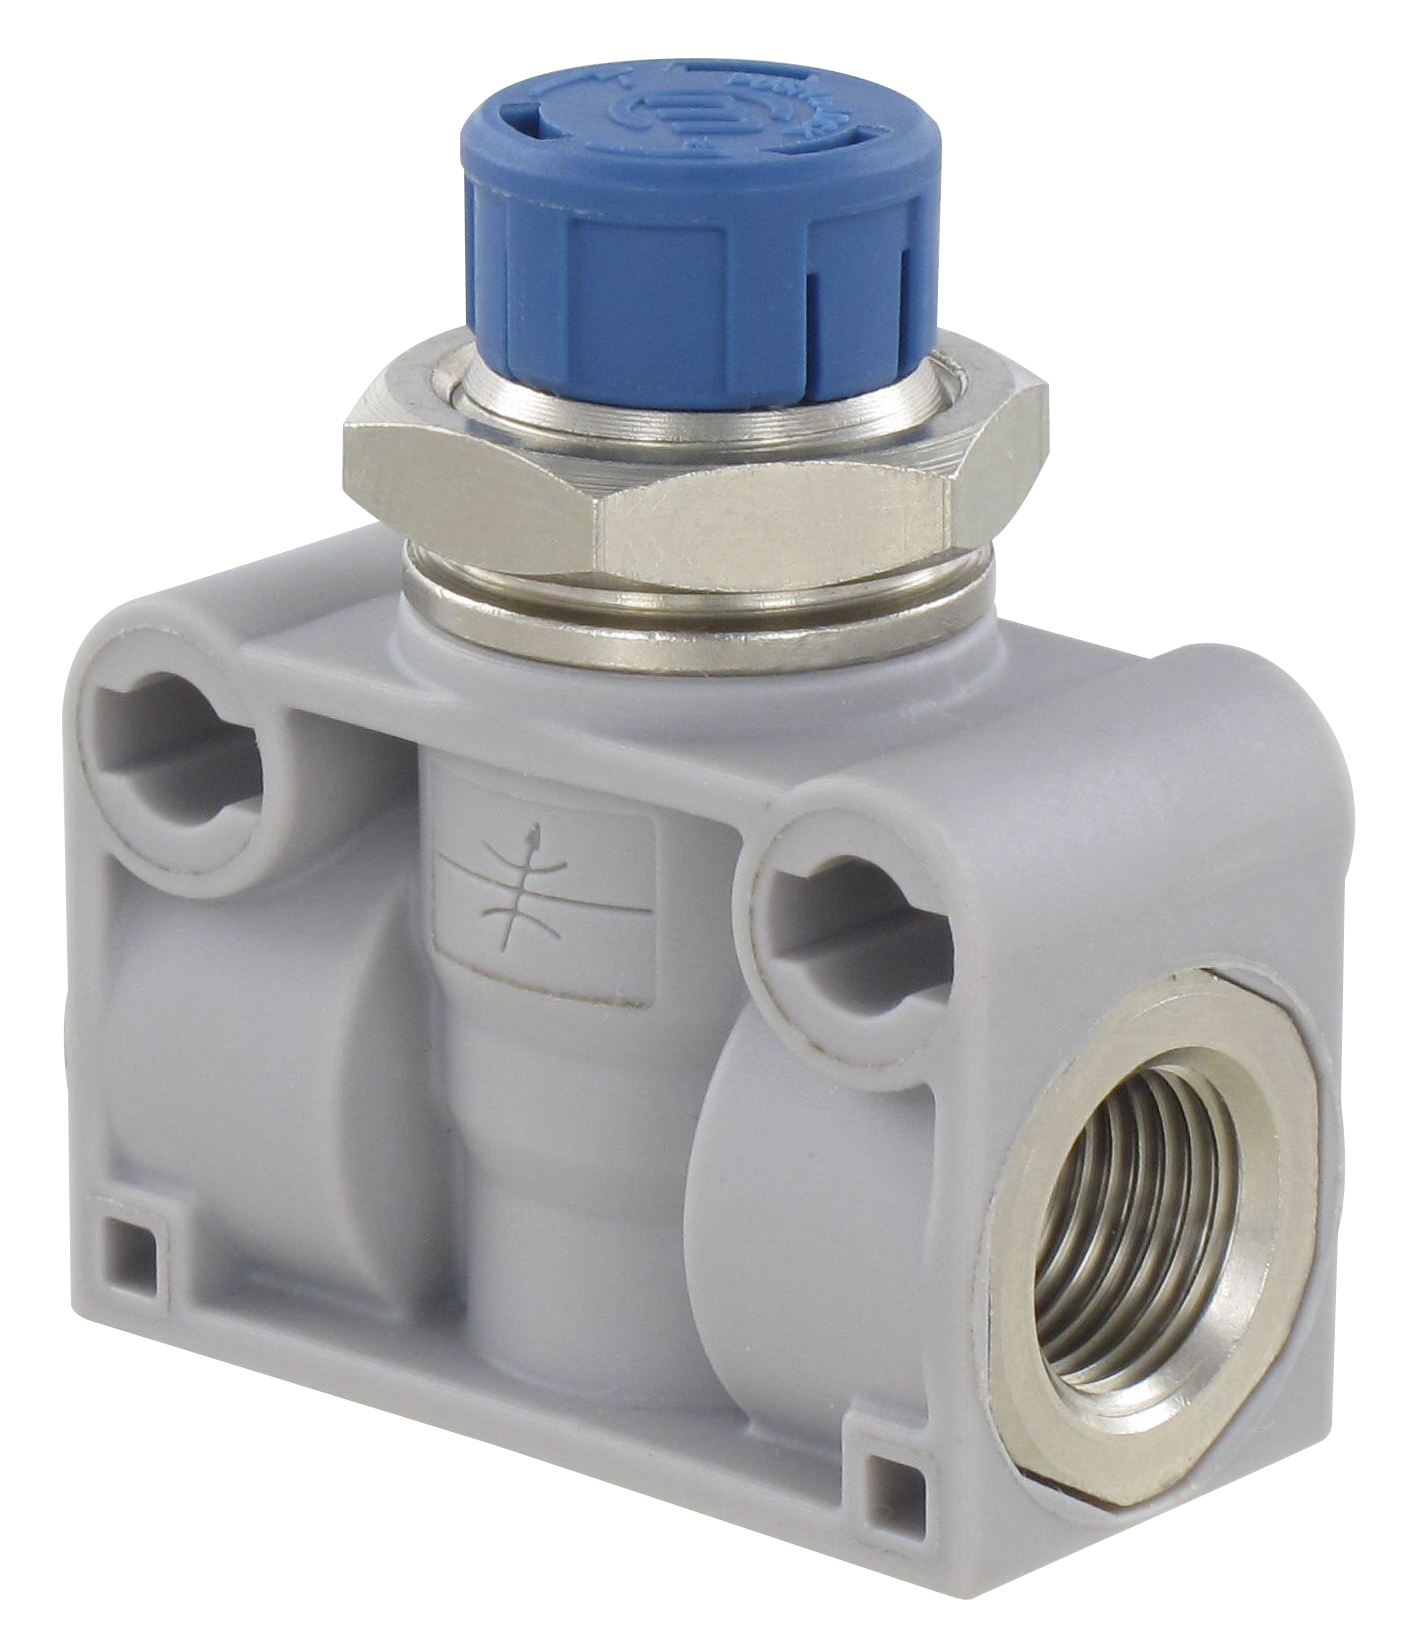 In-line flow regulator, with bulkhead feed-through and regulation locking system